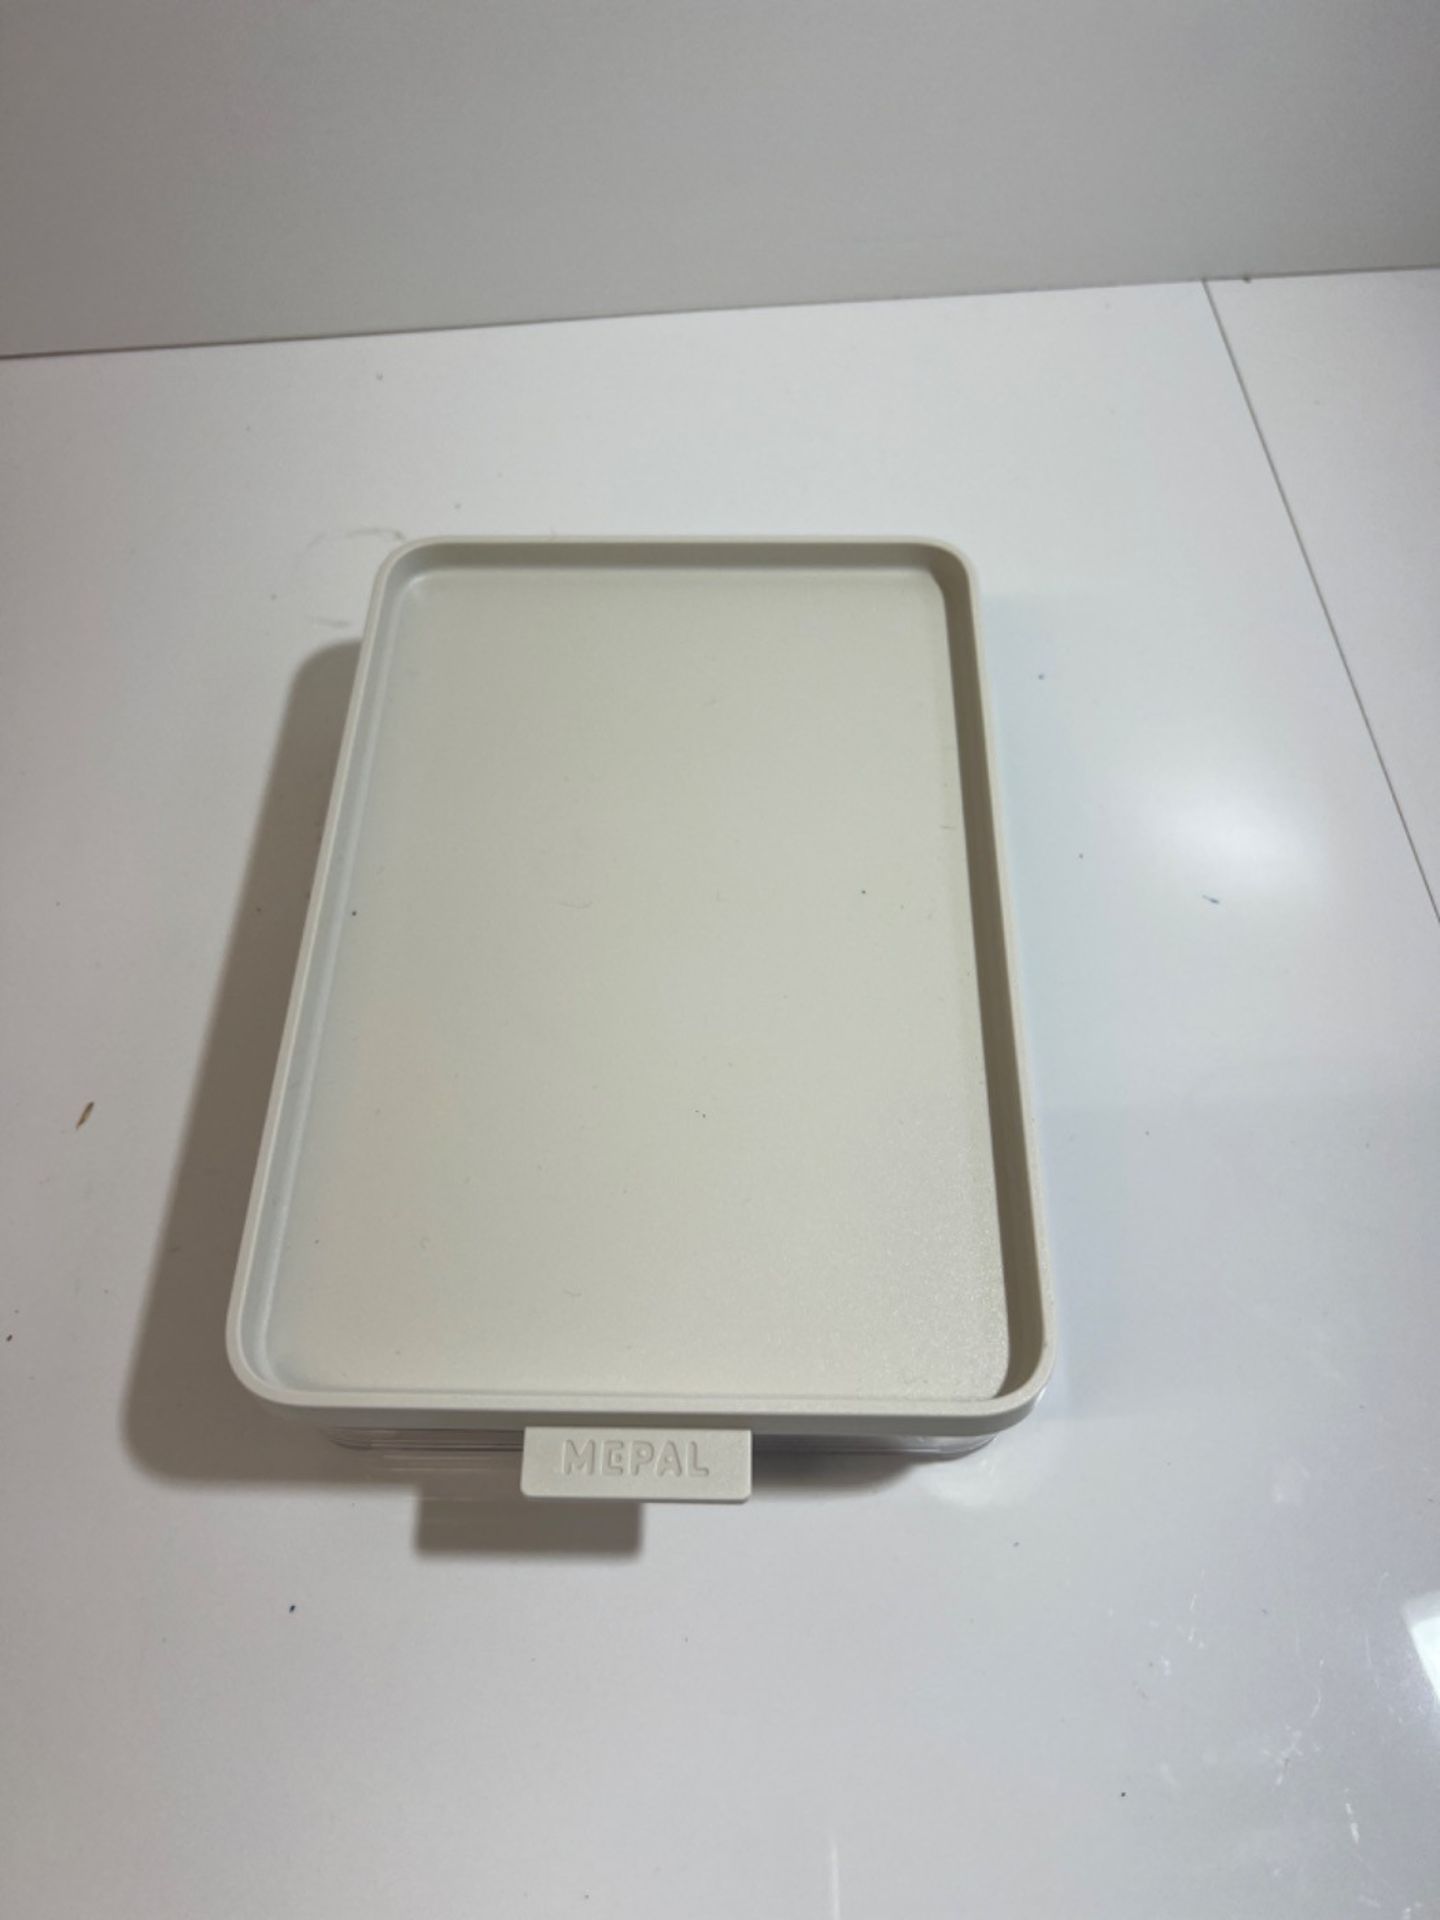 Mepal - Fridge box Omnia cold cuts box Nordic white - Practical storage box for various meat produc - Image 2 of 3